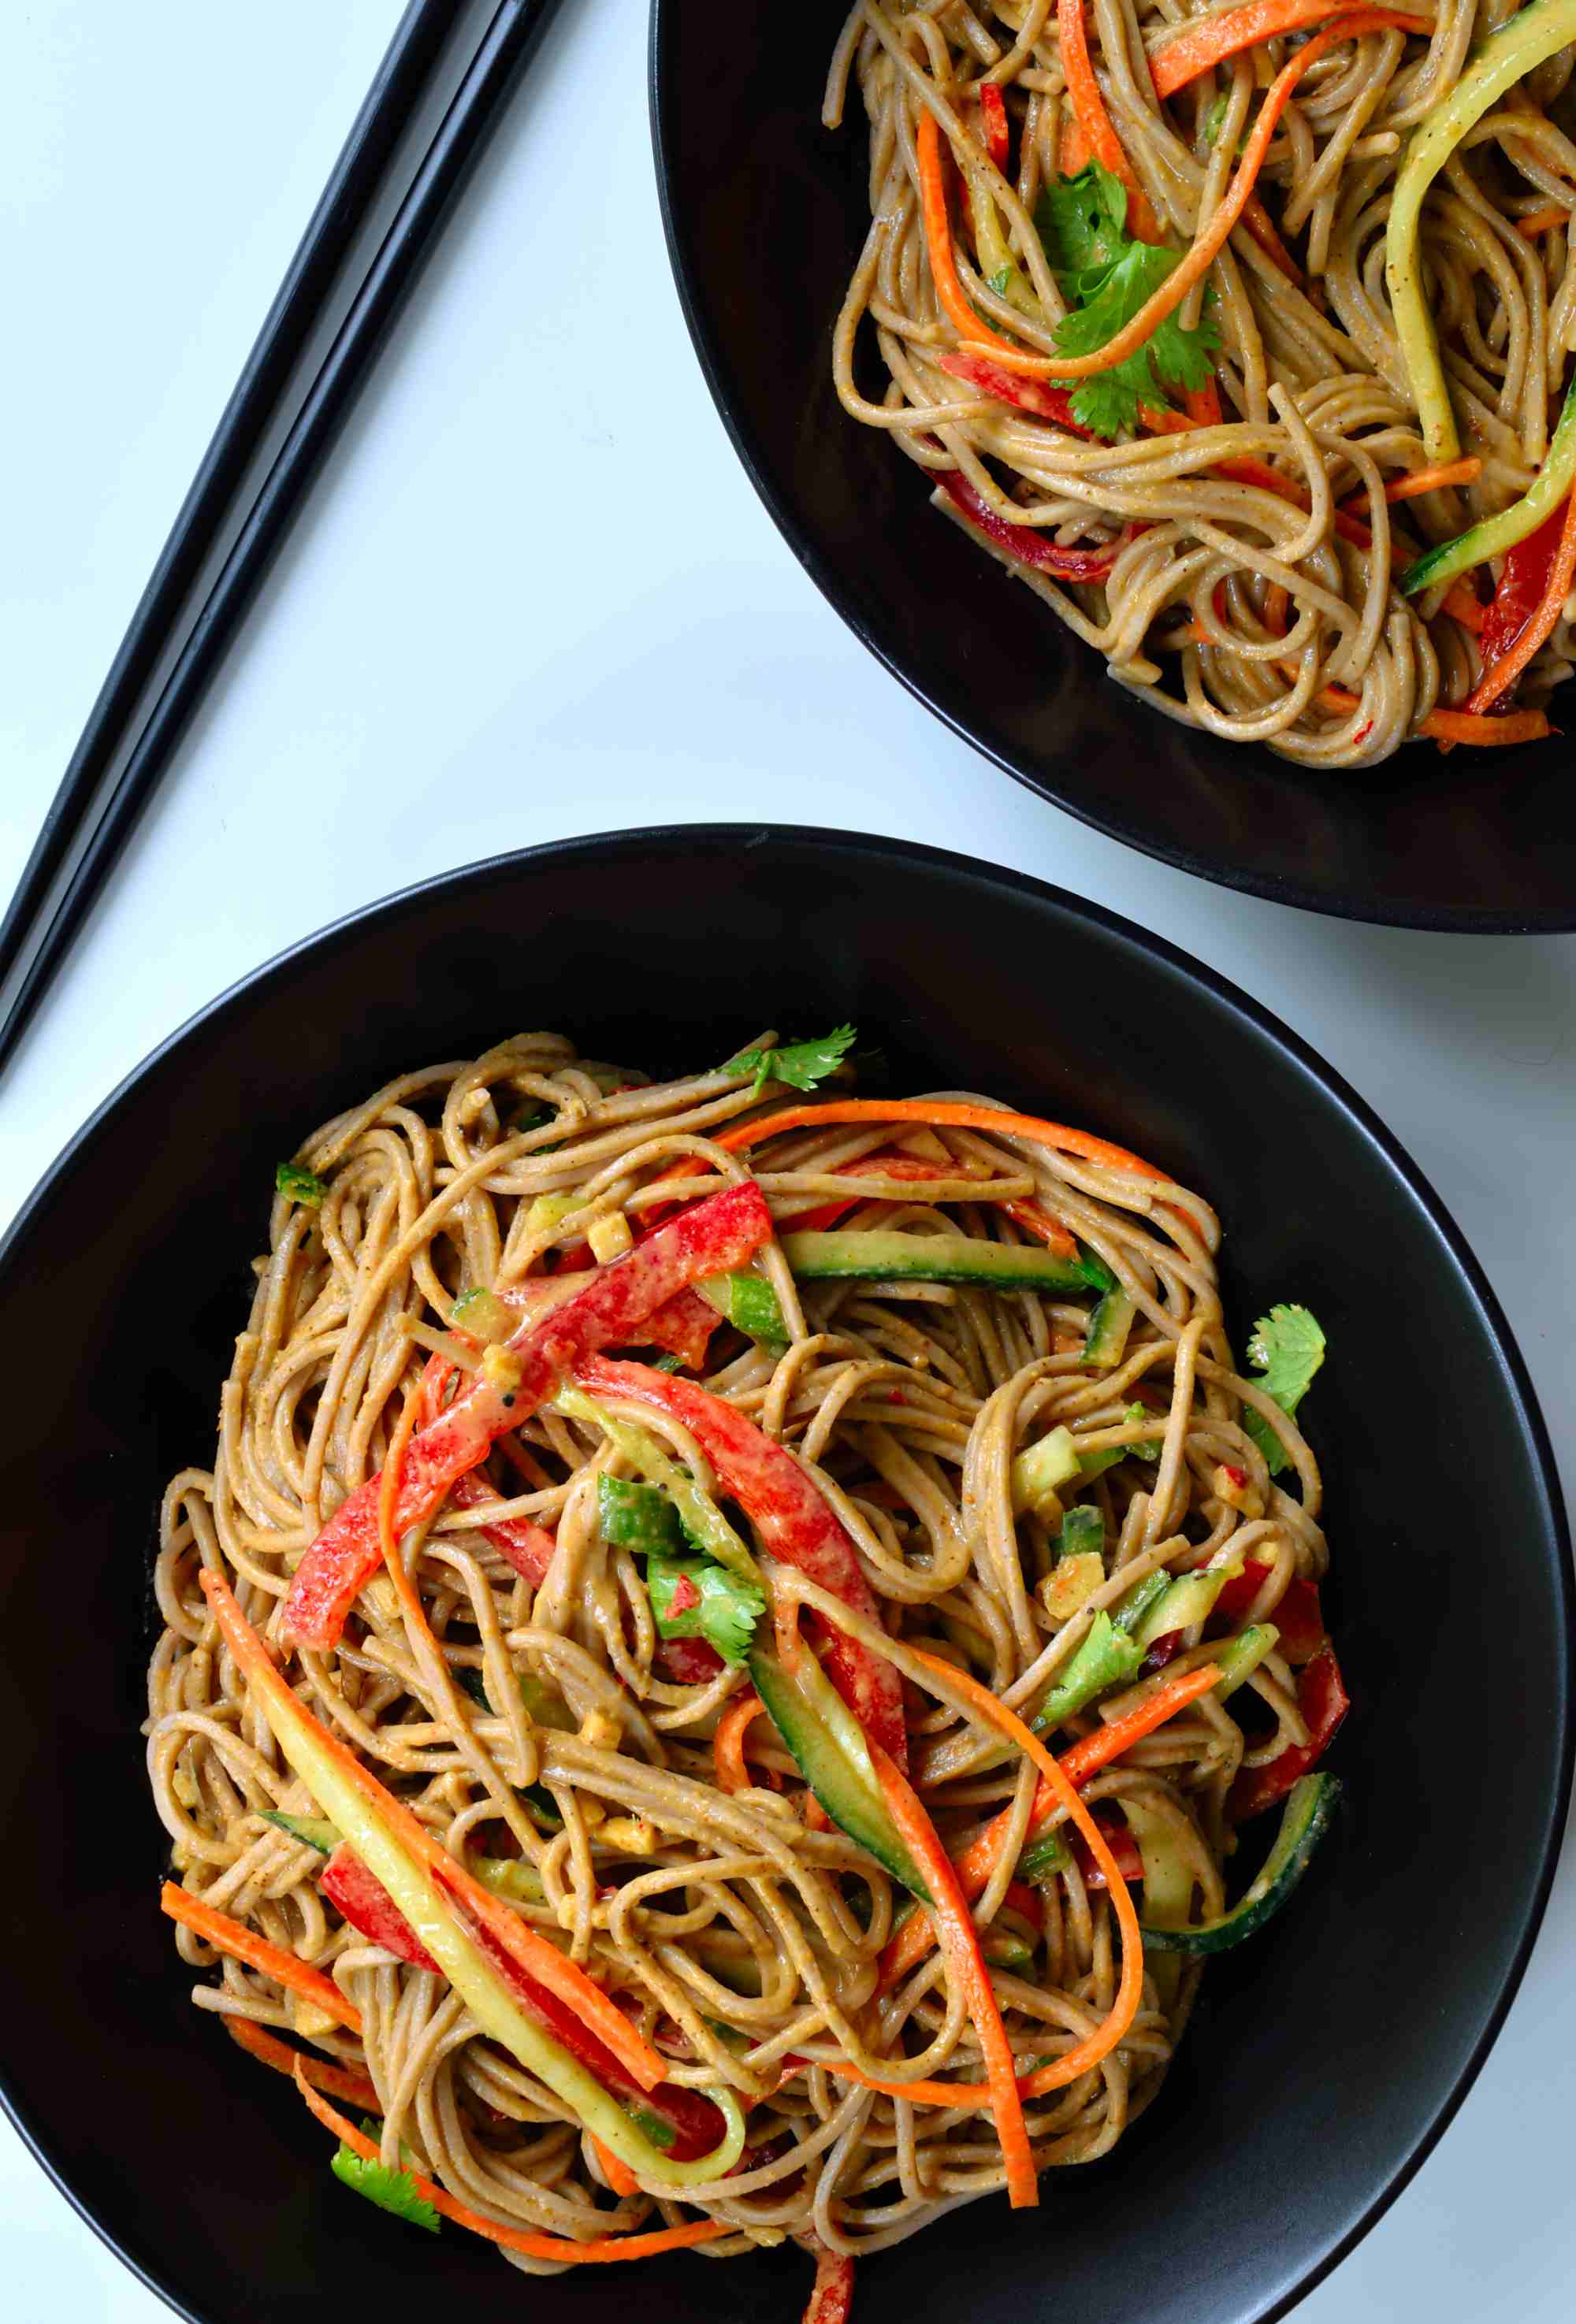 Sesame-ginger soba noodles are another great 30-minute dish. Soba is high in vitamins and minerals and combined with fresh, raw veggies and a simple sesame-ginger sauce. Totally plant-based, this dish makes a great vegetarian or vegan main.